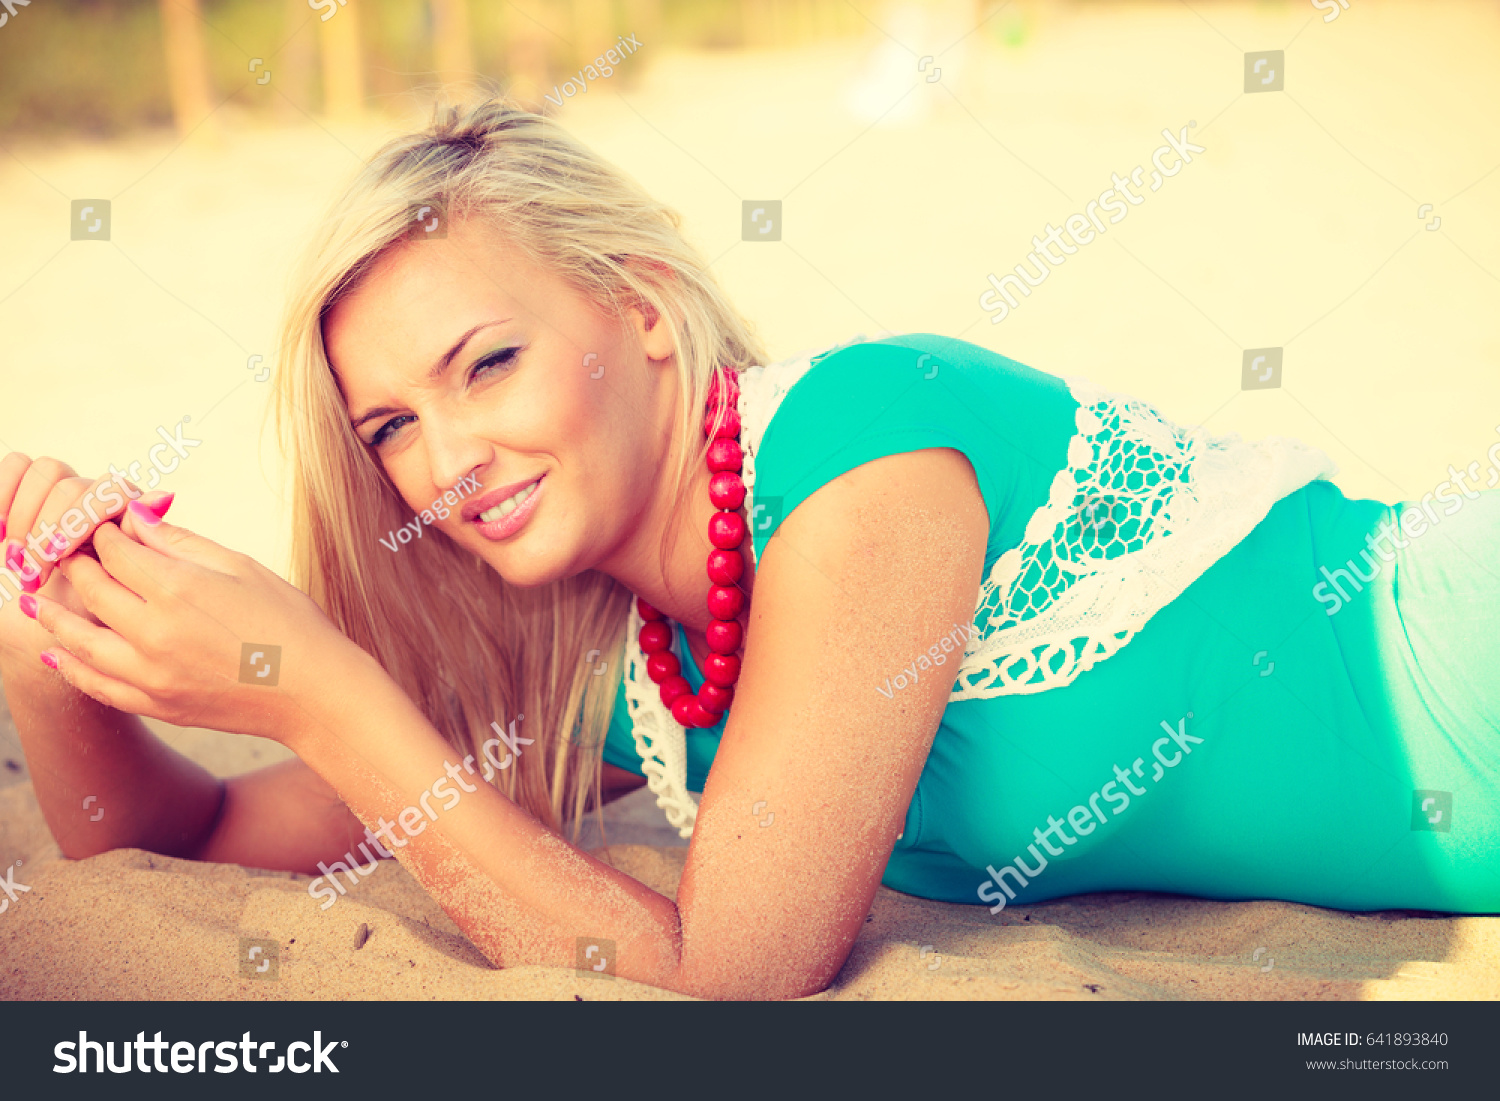 Portrait of attractive blonde woman lying on sandy beach relaxing during summertime #641893840